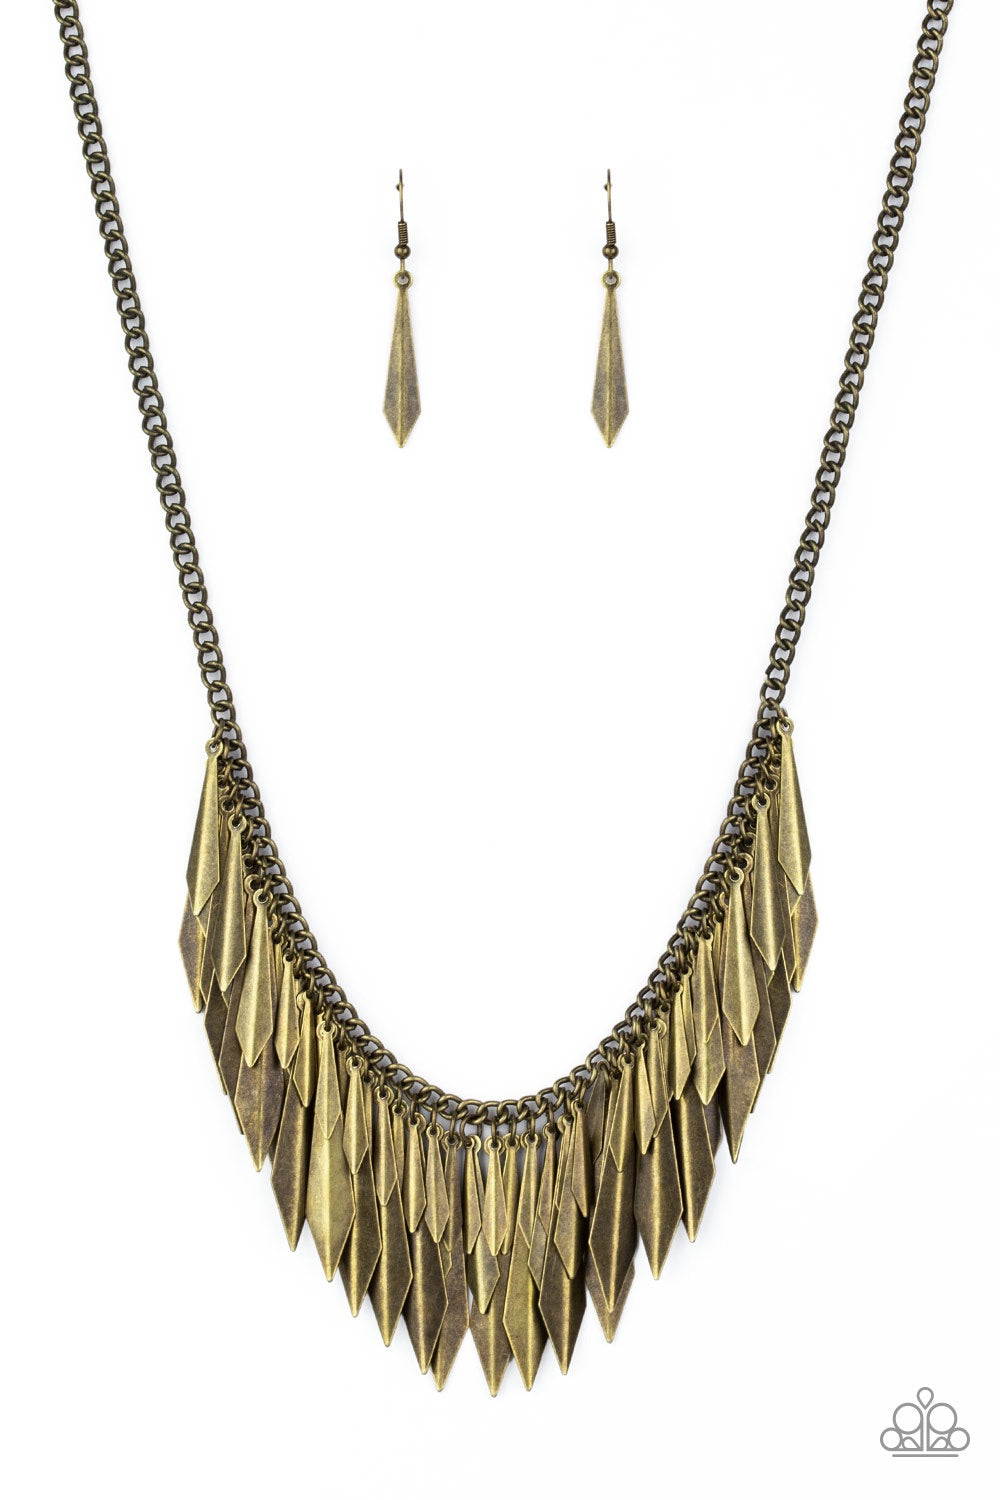 The Thrill-Seeker Brass-Necklace